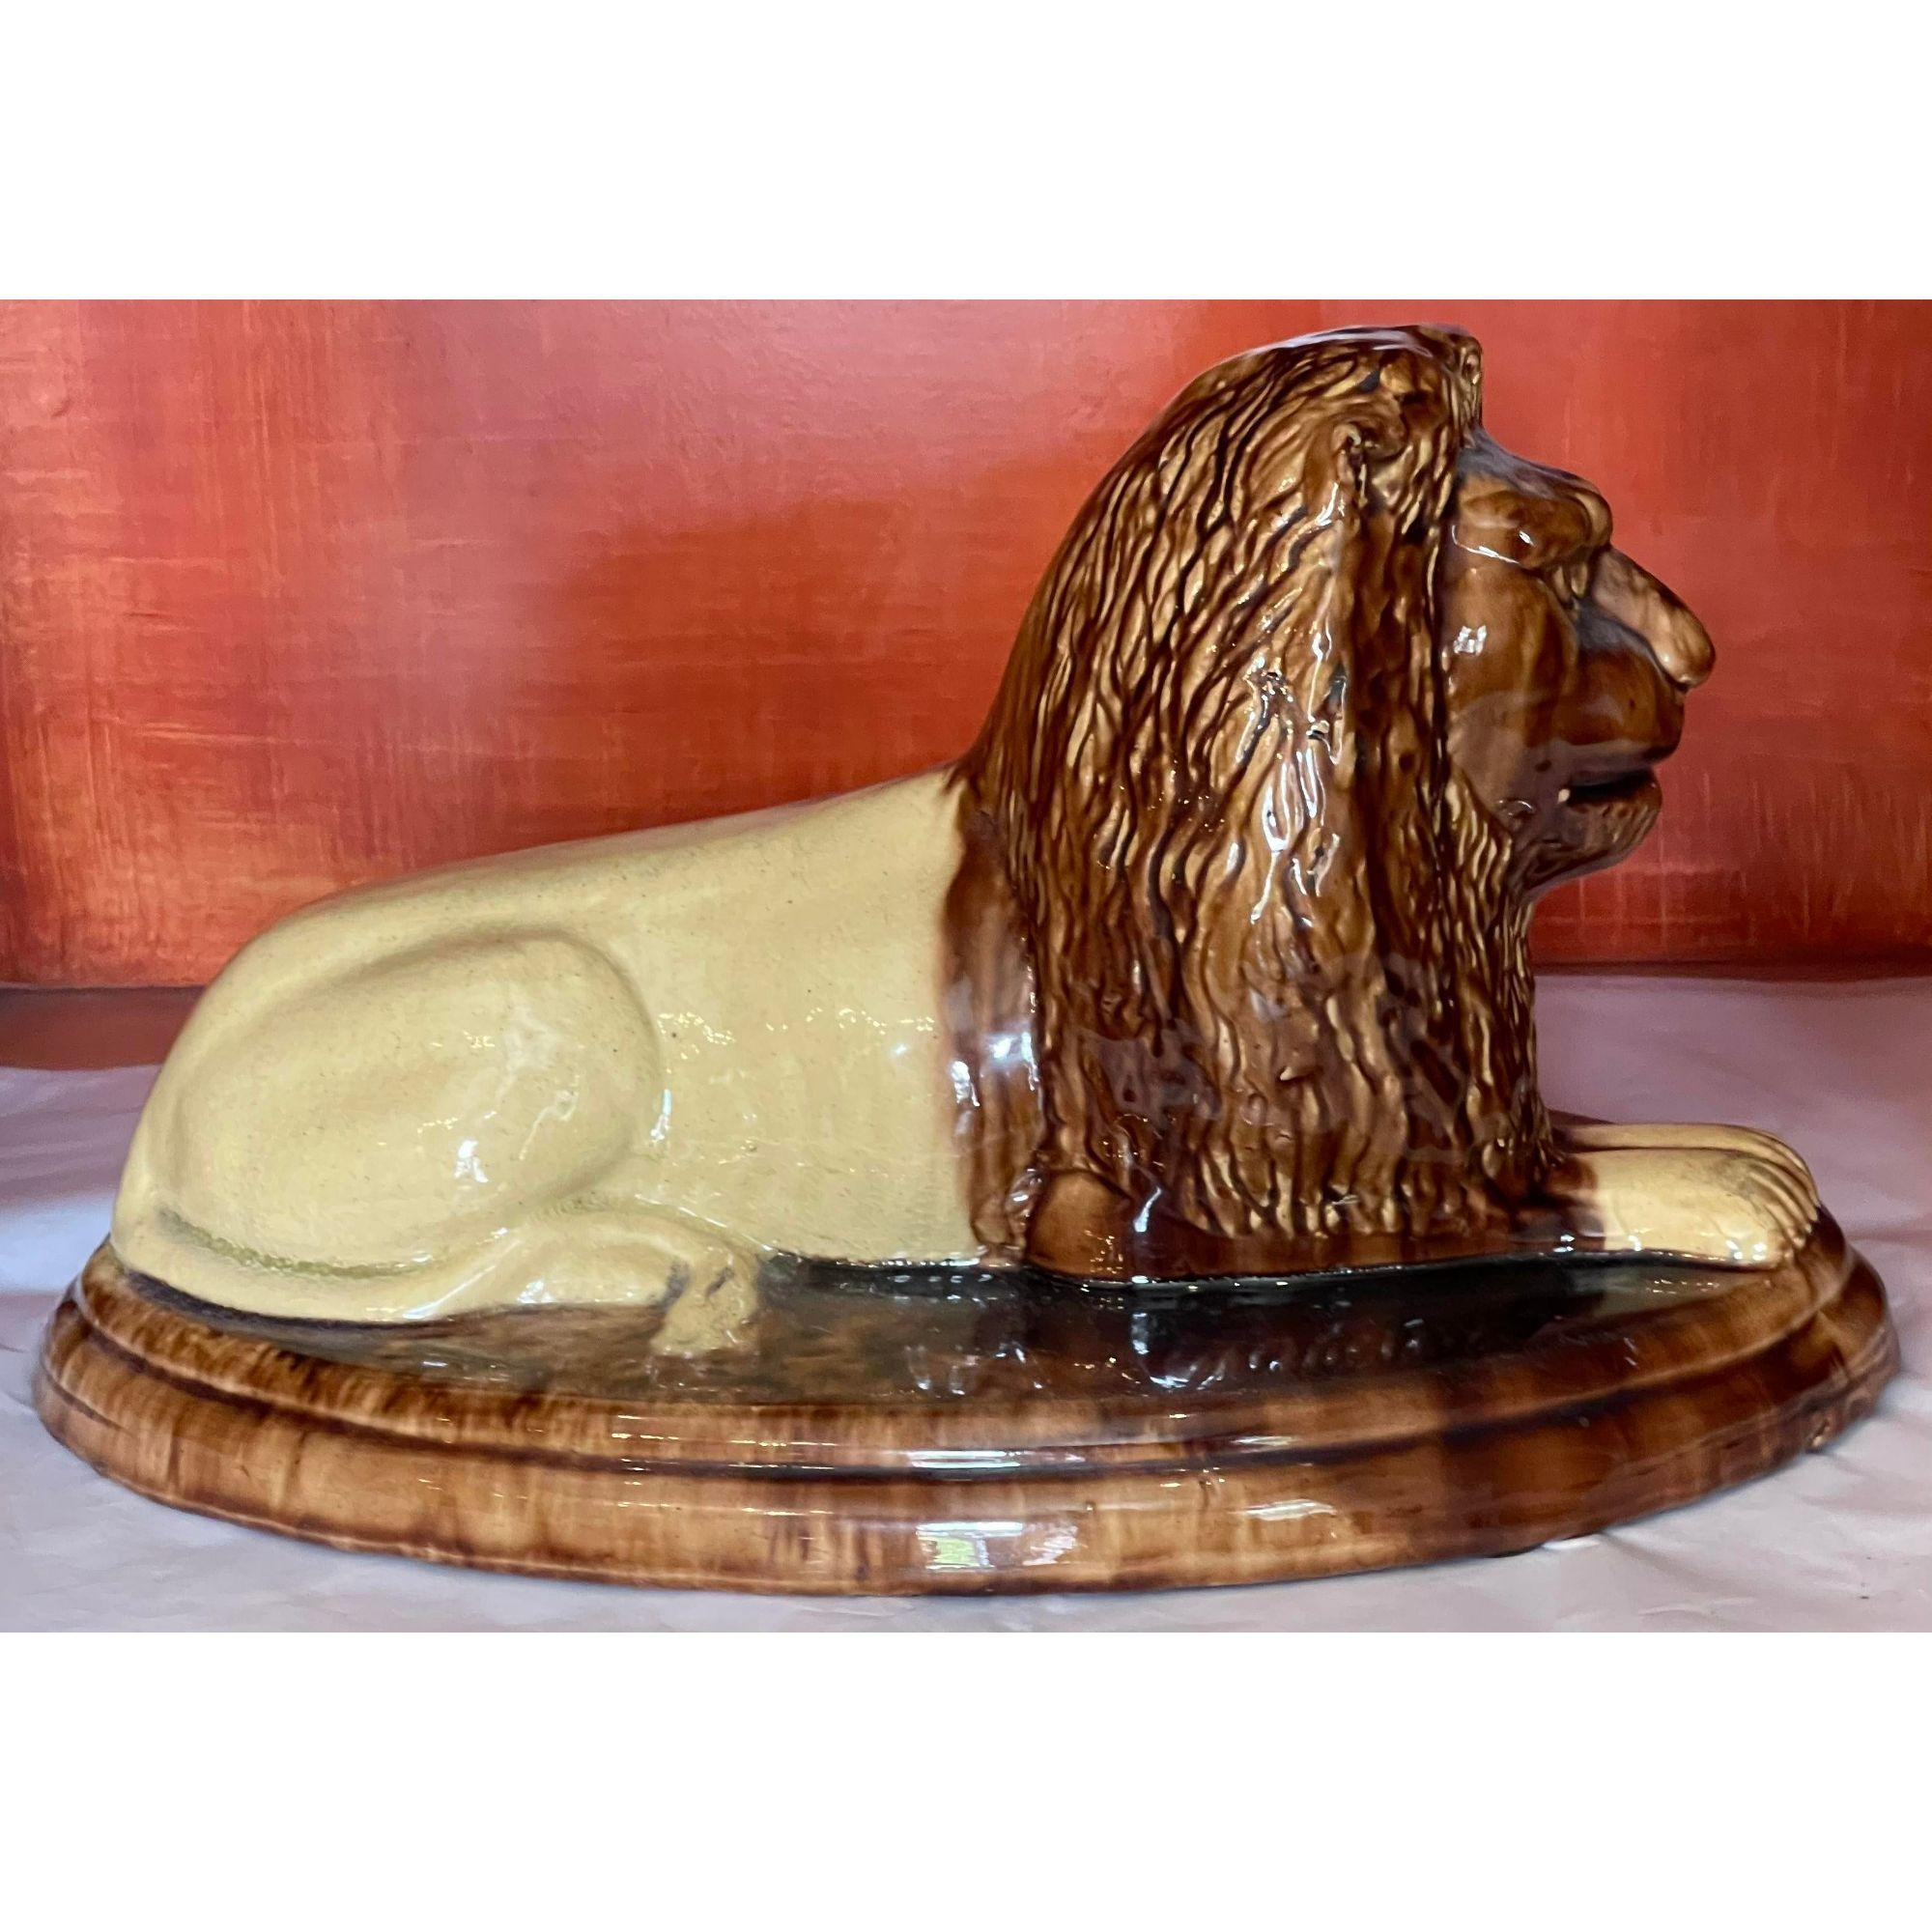 Antique Majolica pottery recumbent lion sculpture. It is very unusual in superb quality majolica pottery with a brown and yellow glaze.

Additional information: 
Materials: pottery.
Color: brown.
Period: 19th century.
Styles: English, French